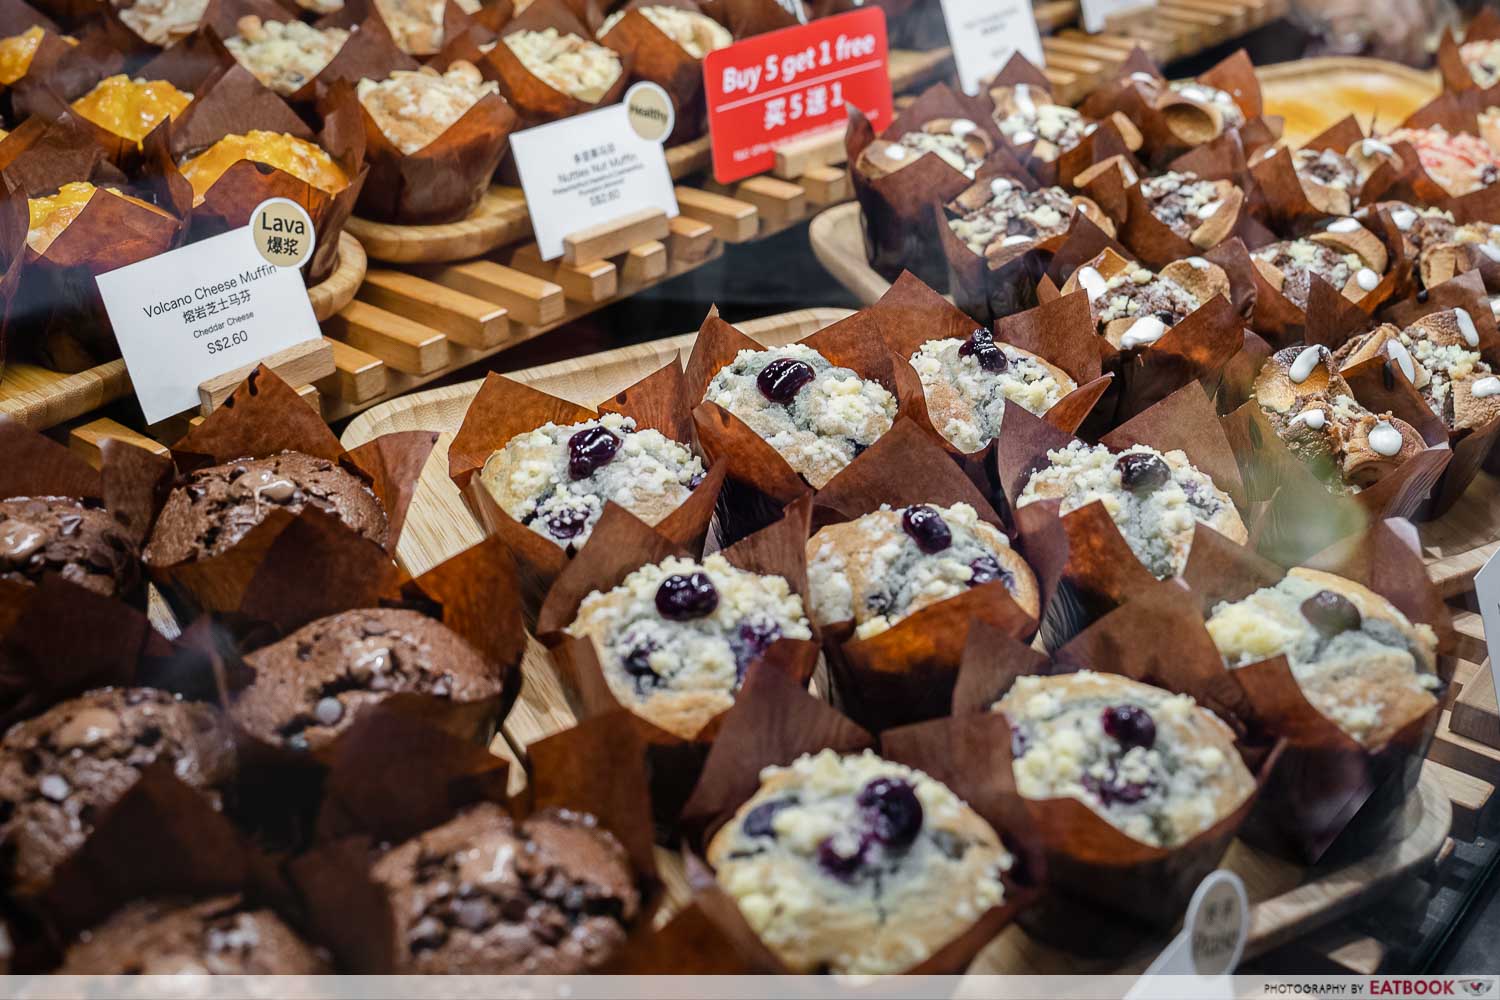 Butter-and-cream-bakery-muffins-display